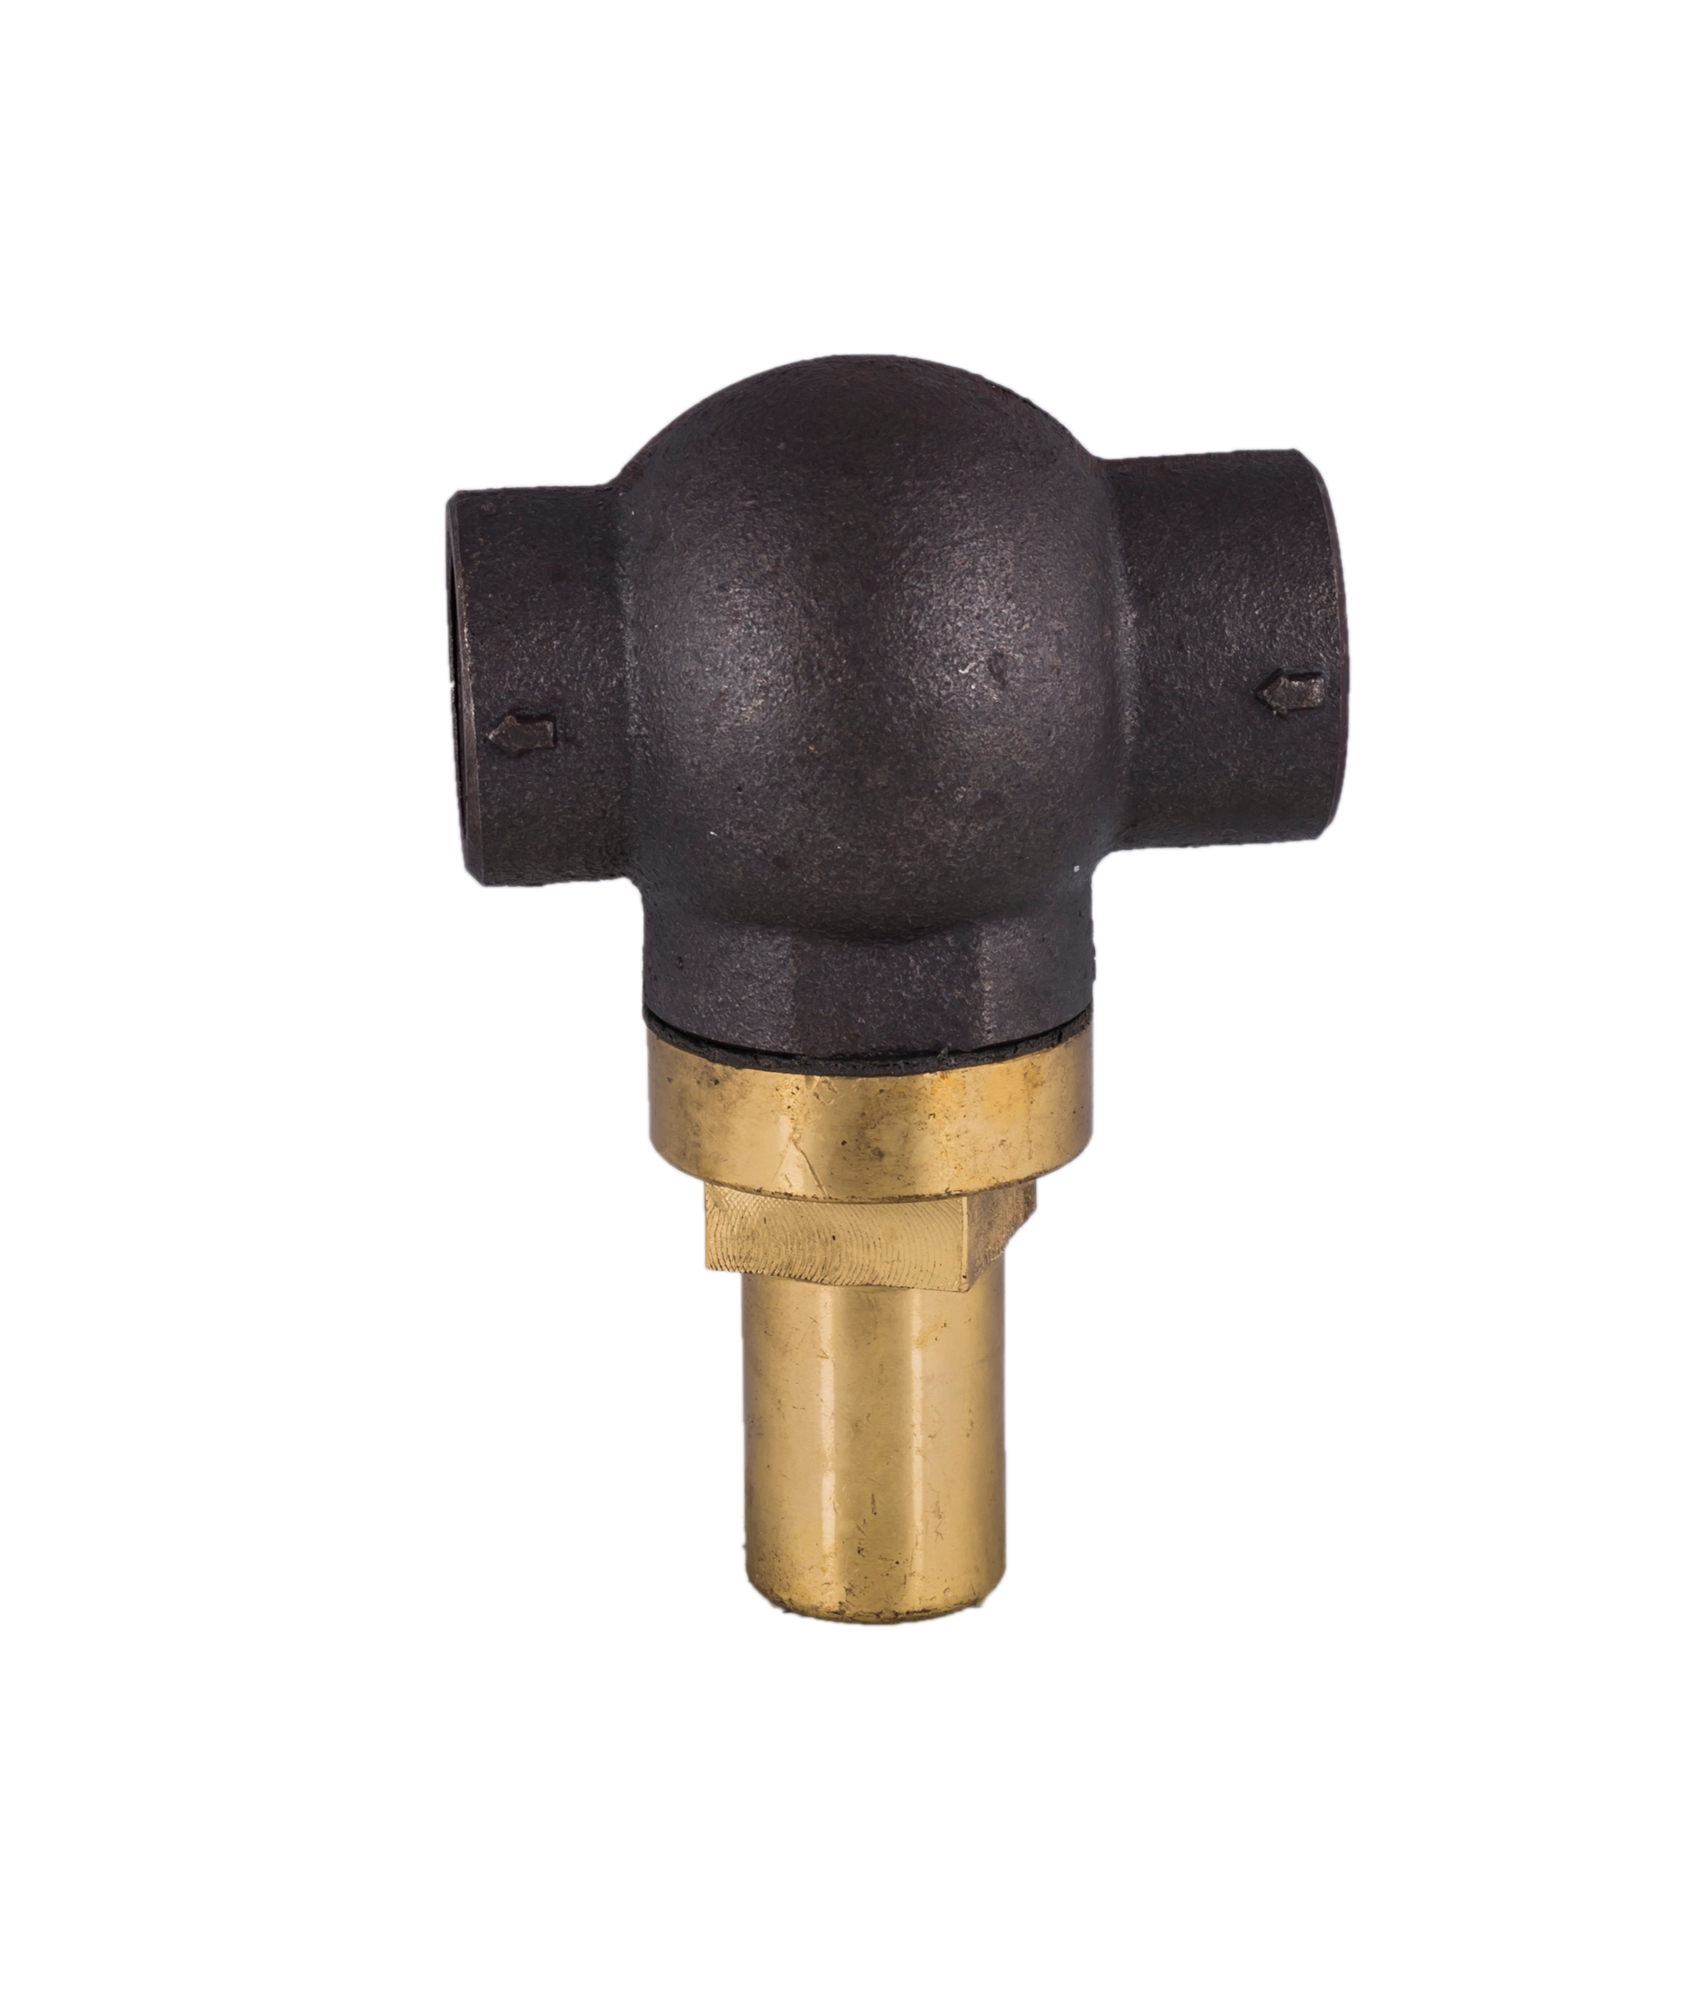 Pressure Keep Valve- Use In Air Compressor Air Inlet System.